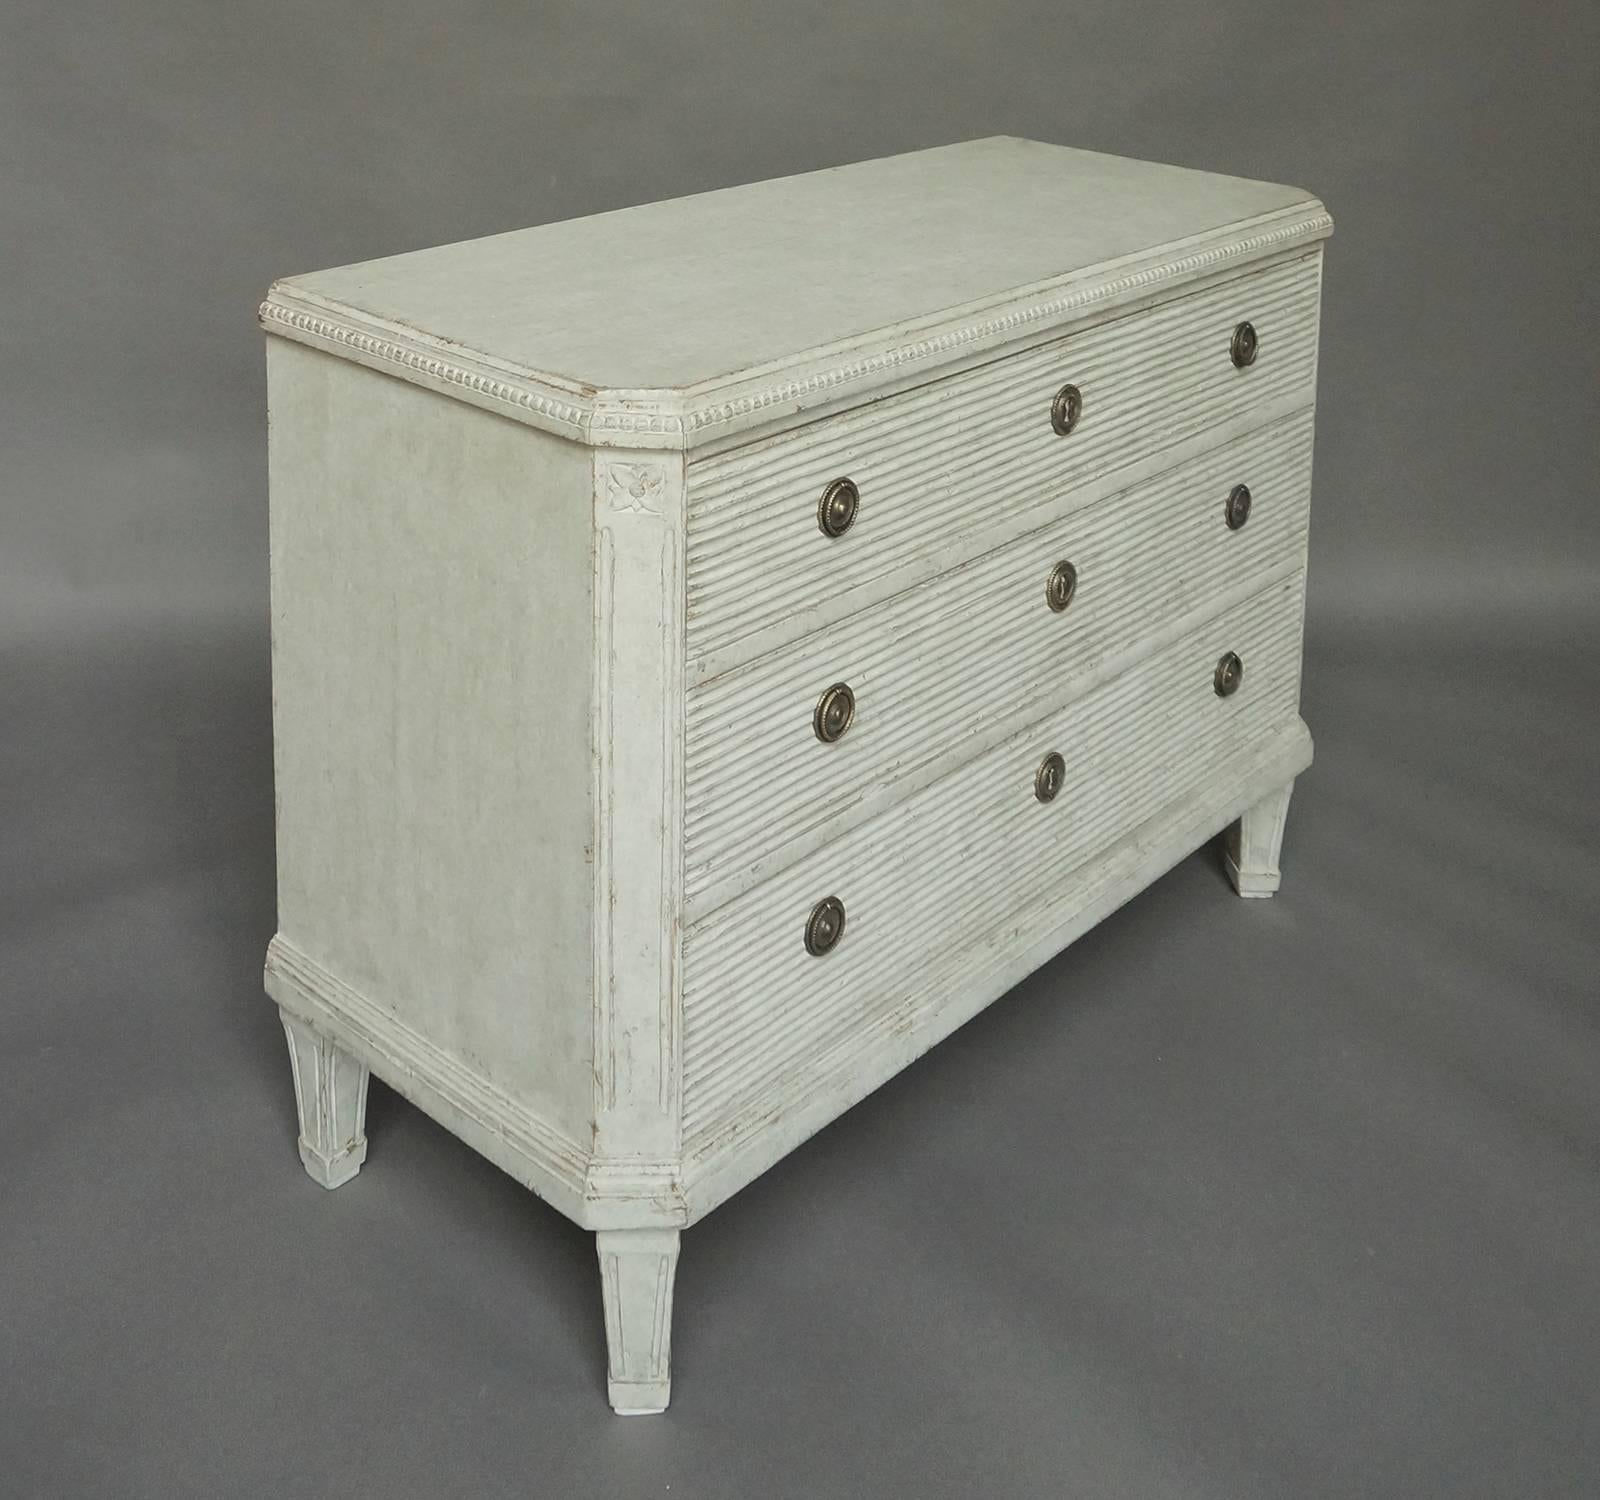 Chest of drawers in the Gustavian Style, Sweden, circa 1840. Dentil molding at the top, canted corners with carved floral detail and reeded drawer fronts. Original brass hardware.